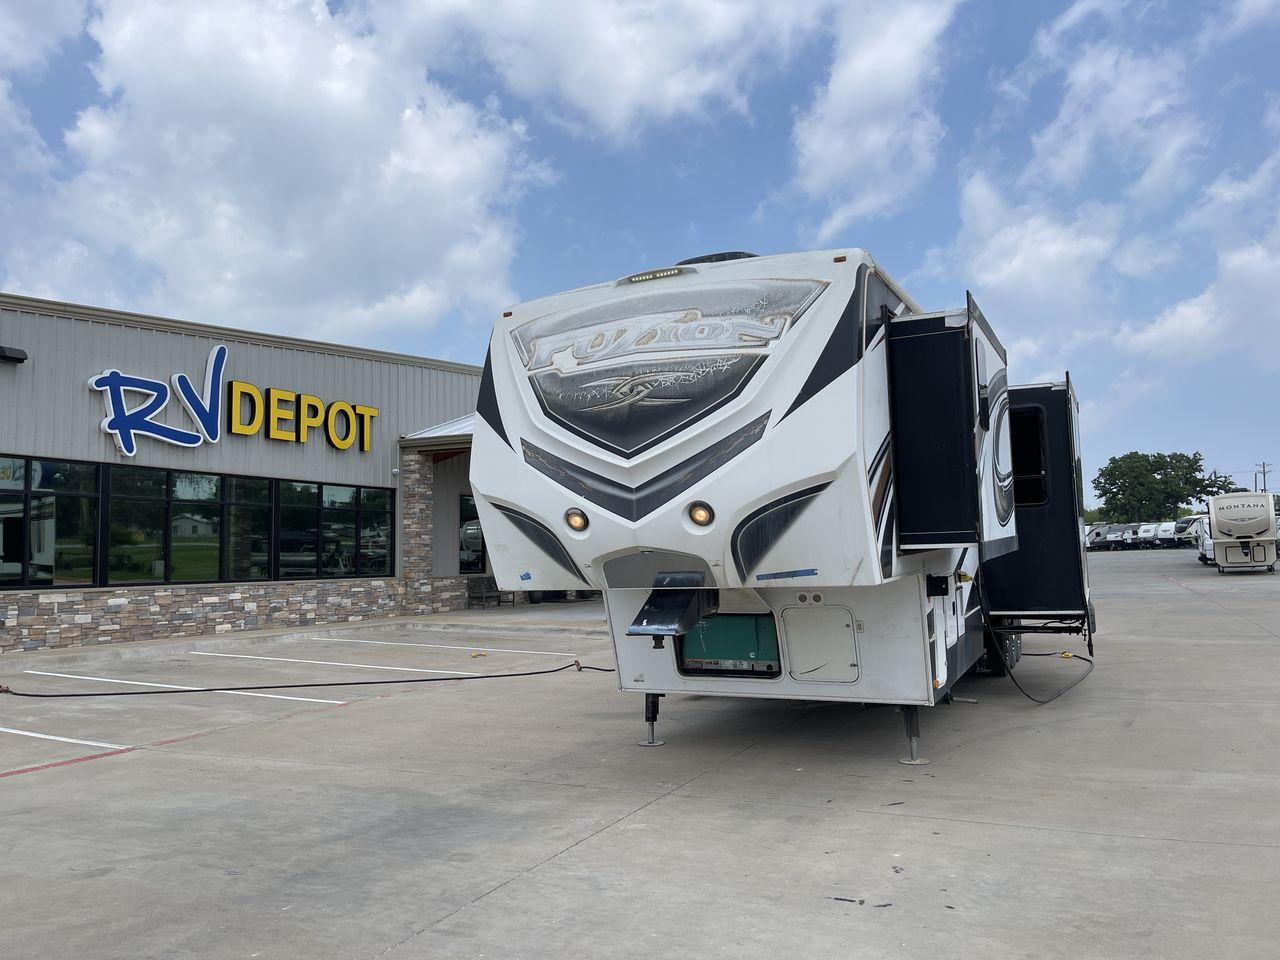 2014 WHITE KEYSTONE FUZION M-399 (4YDF39939EF) , Length: 41 ft. | Dry Weight: 14,100 lbs. | Gross Weight: 18,000 lbs. | Slides: 3 transmission, located at 4319 N Main Street, Cleburne, TX, 76033, (817) 221-0660, 32.435829, -97.384178 - The 2014 Keystone Fuzion M-399 offers exceptional value for its price. With its white exterior color, this RV stands out on the road and is sure to turn heads wherever you go. Measuring 41 ft. in length, this toy hauler provides ample space for you and your loved ones to relax and enjoy your travels - Photo #0